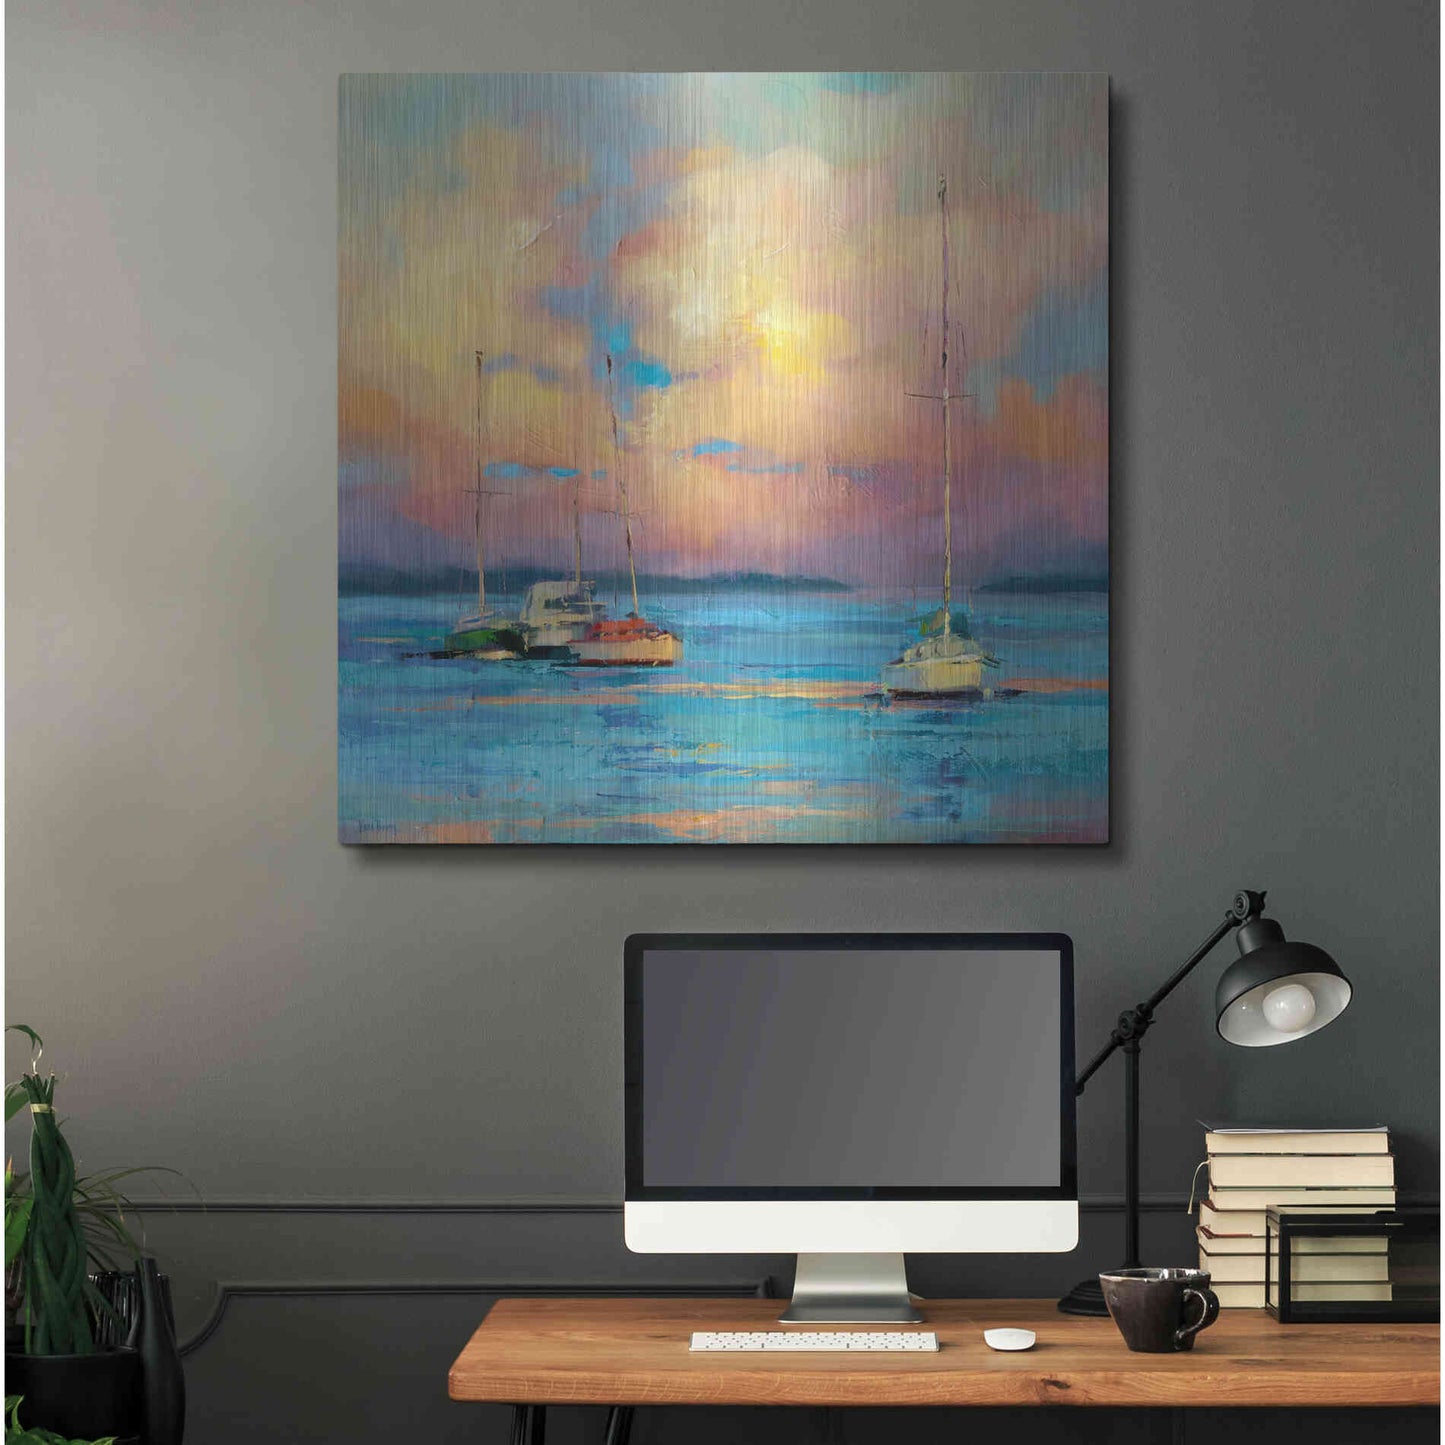 Luxe Metal Art 'After The Sailing Day' by Kasia Bruniany Metal Wall Art,36x36